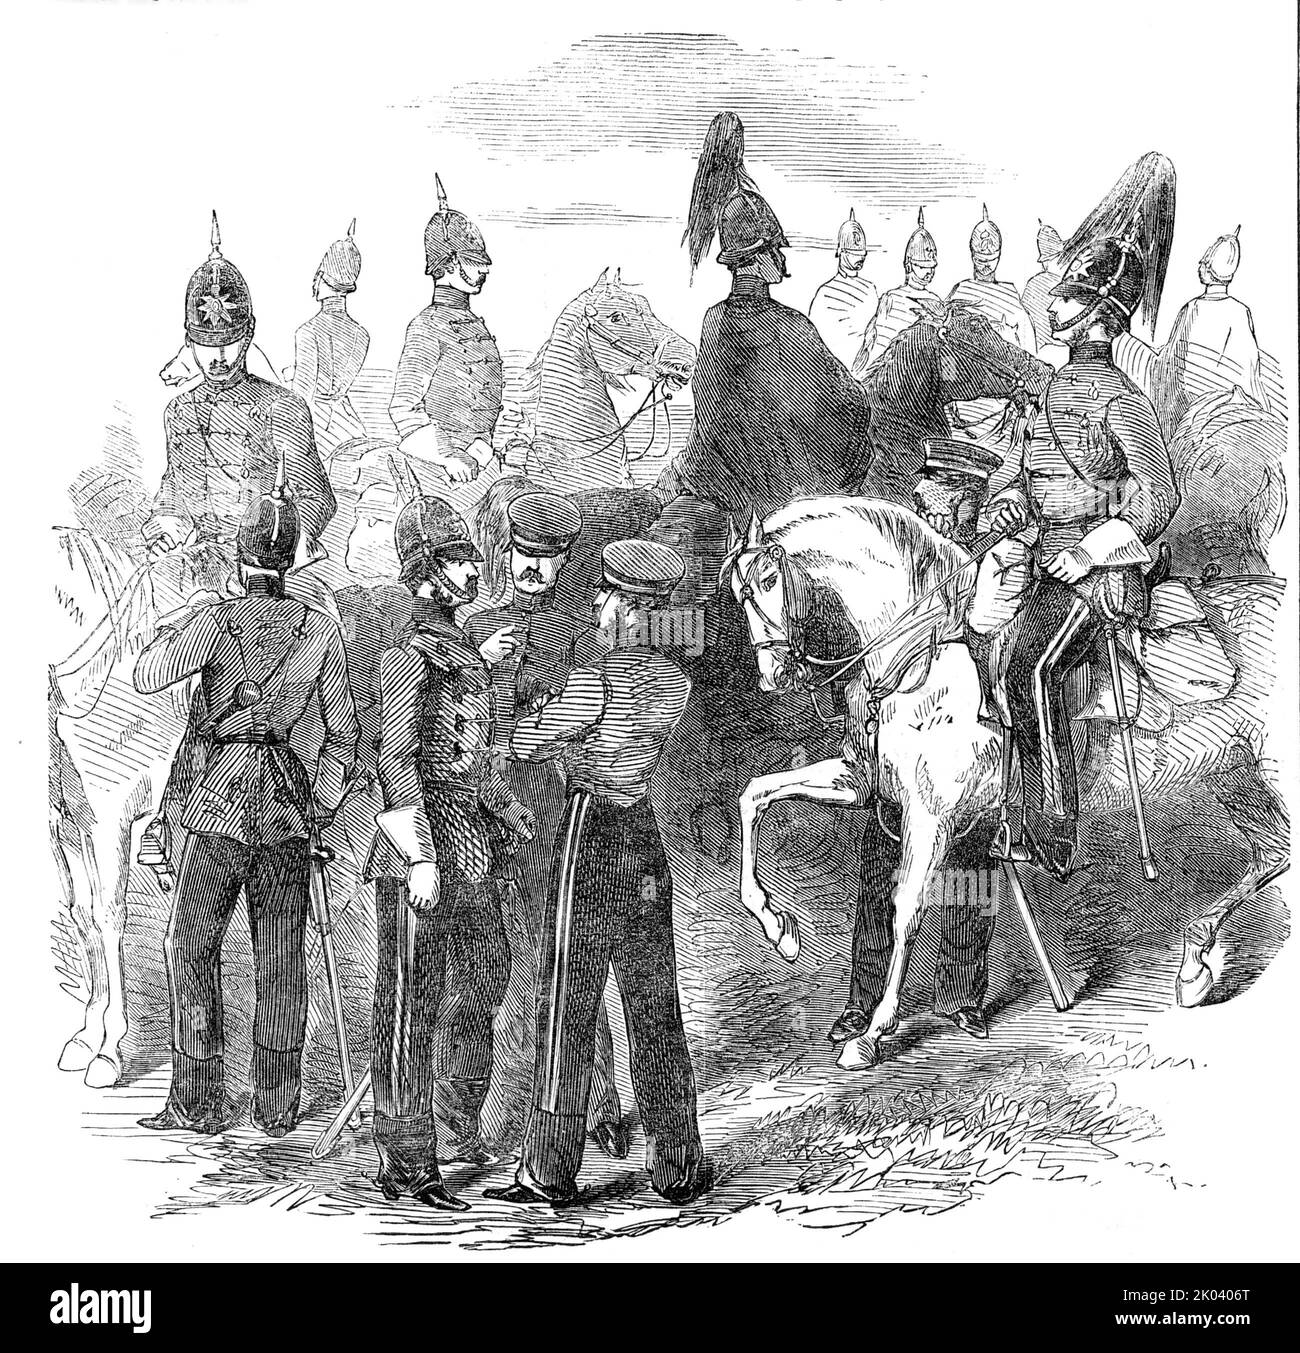 New Cavalry Corps. - the Mounted Staff, 1854. British military uniforms during the Crimean War. '...new Corps...destined for special service in the East...They are designated the Mounted Staff Corps, and consist of men selected for their intelligence and good conduct from the Irish Police and Constabulary Force principally, and also from the Metropolitan Police...The uniform is a handsome scarlet Hungarian tunic, the front sleeves and collar richly braided, Royal blue facings (the officers' tunics richly and tastefully laced); blue trousers, with two scarlet stripes, and leather strappings and Stock Photo